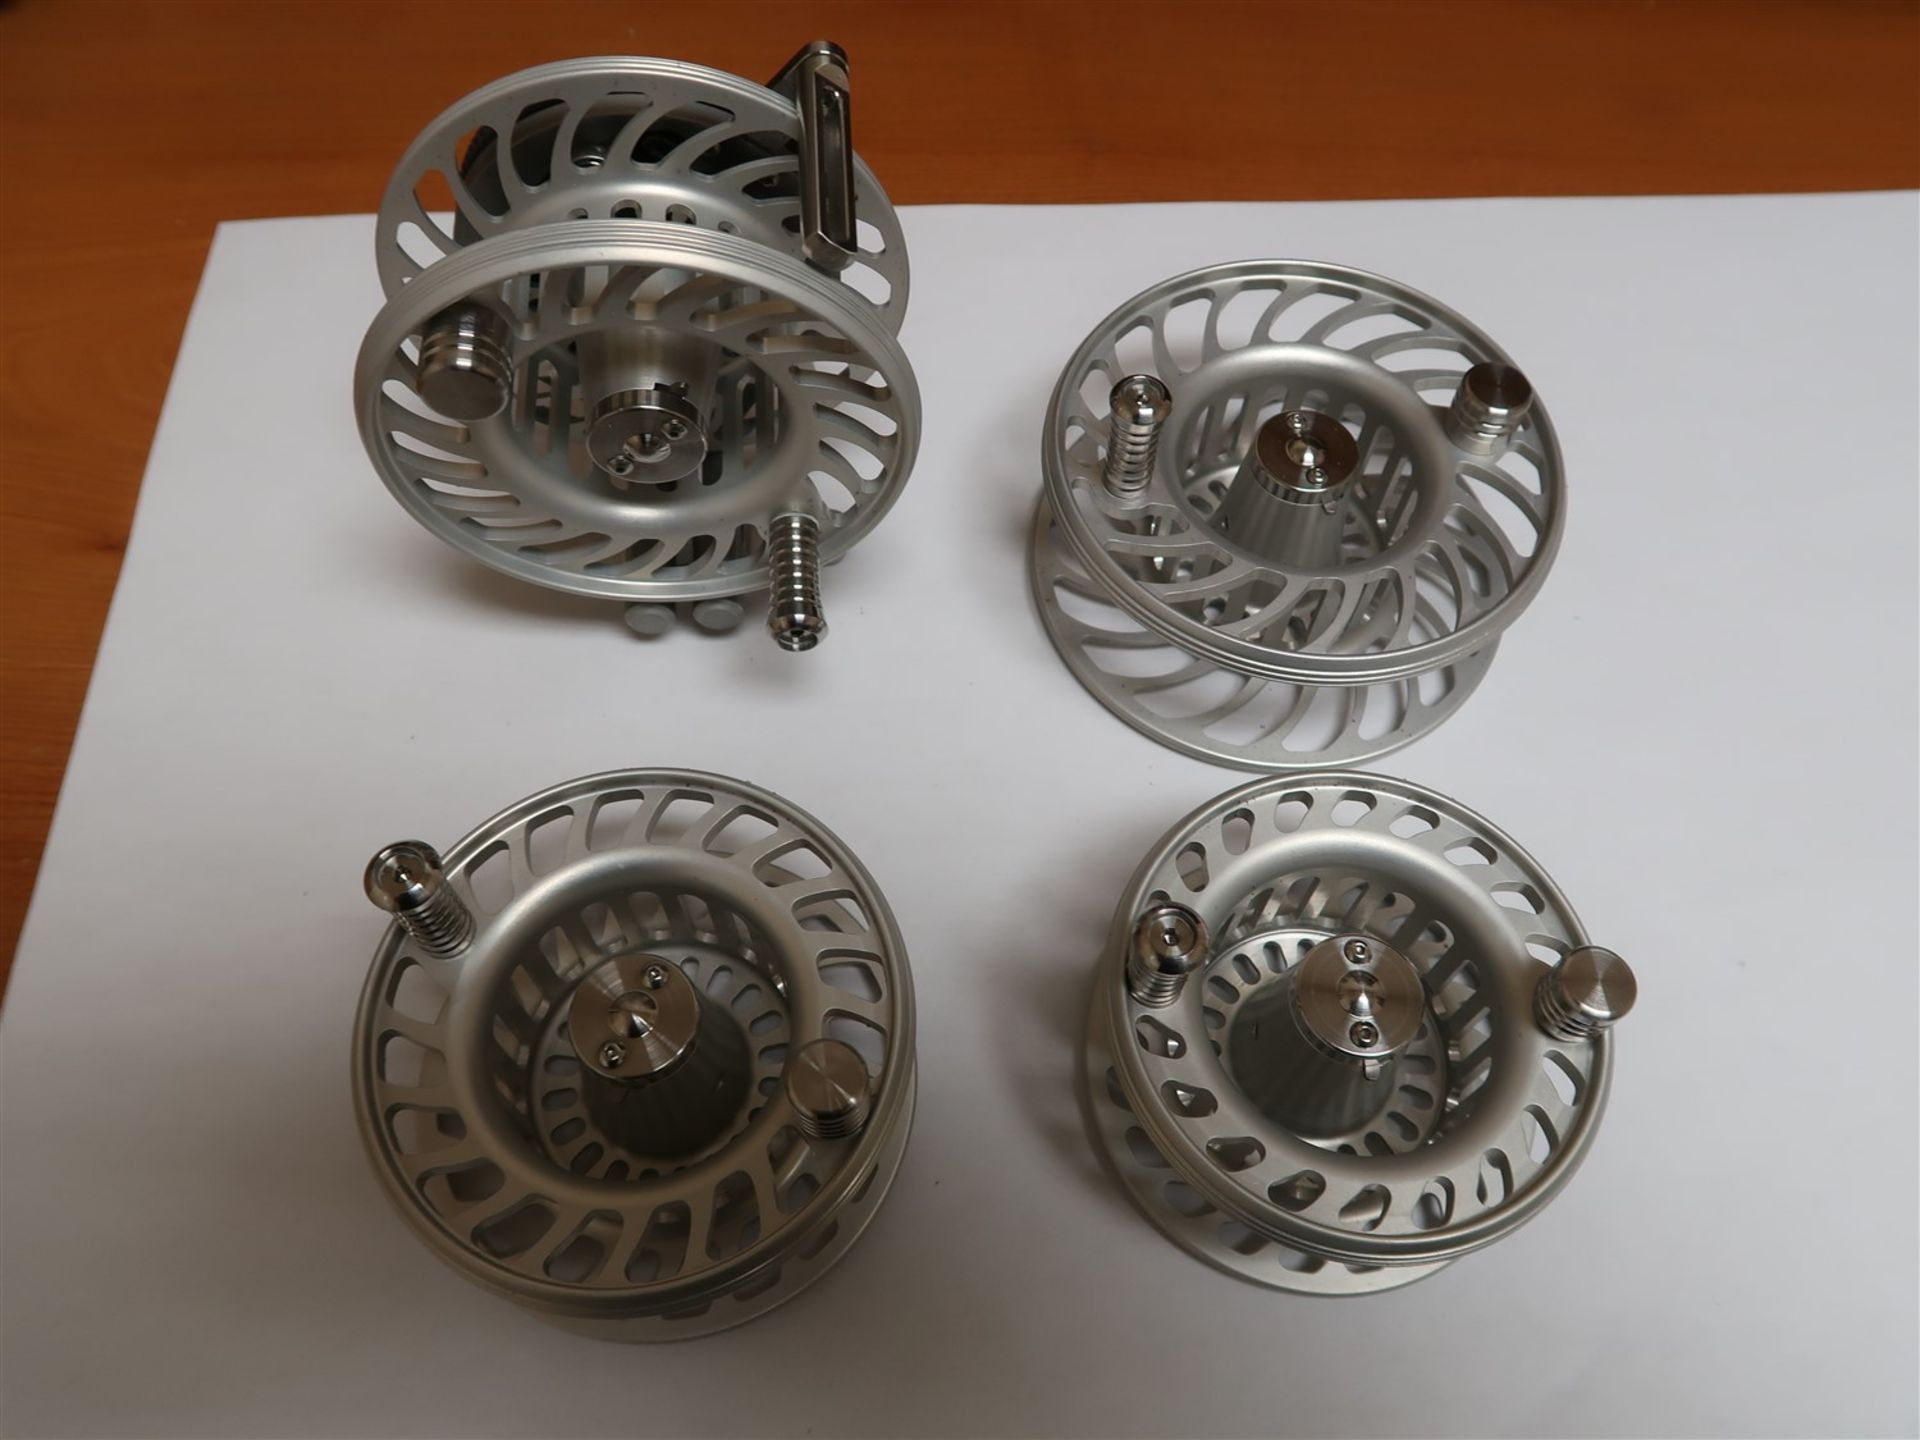 The Traveller Set of 4 interchangeable adjustable spool size Fly Fishing Reels (Silver Satin Finish) - Image 4 of 5